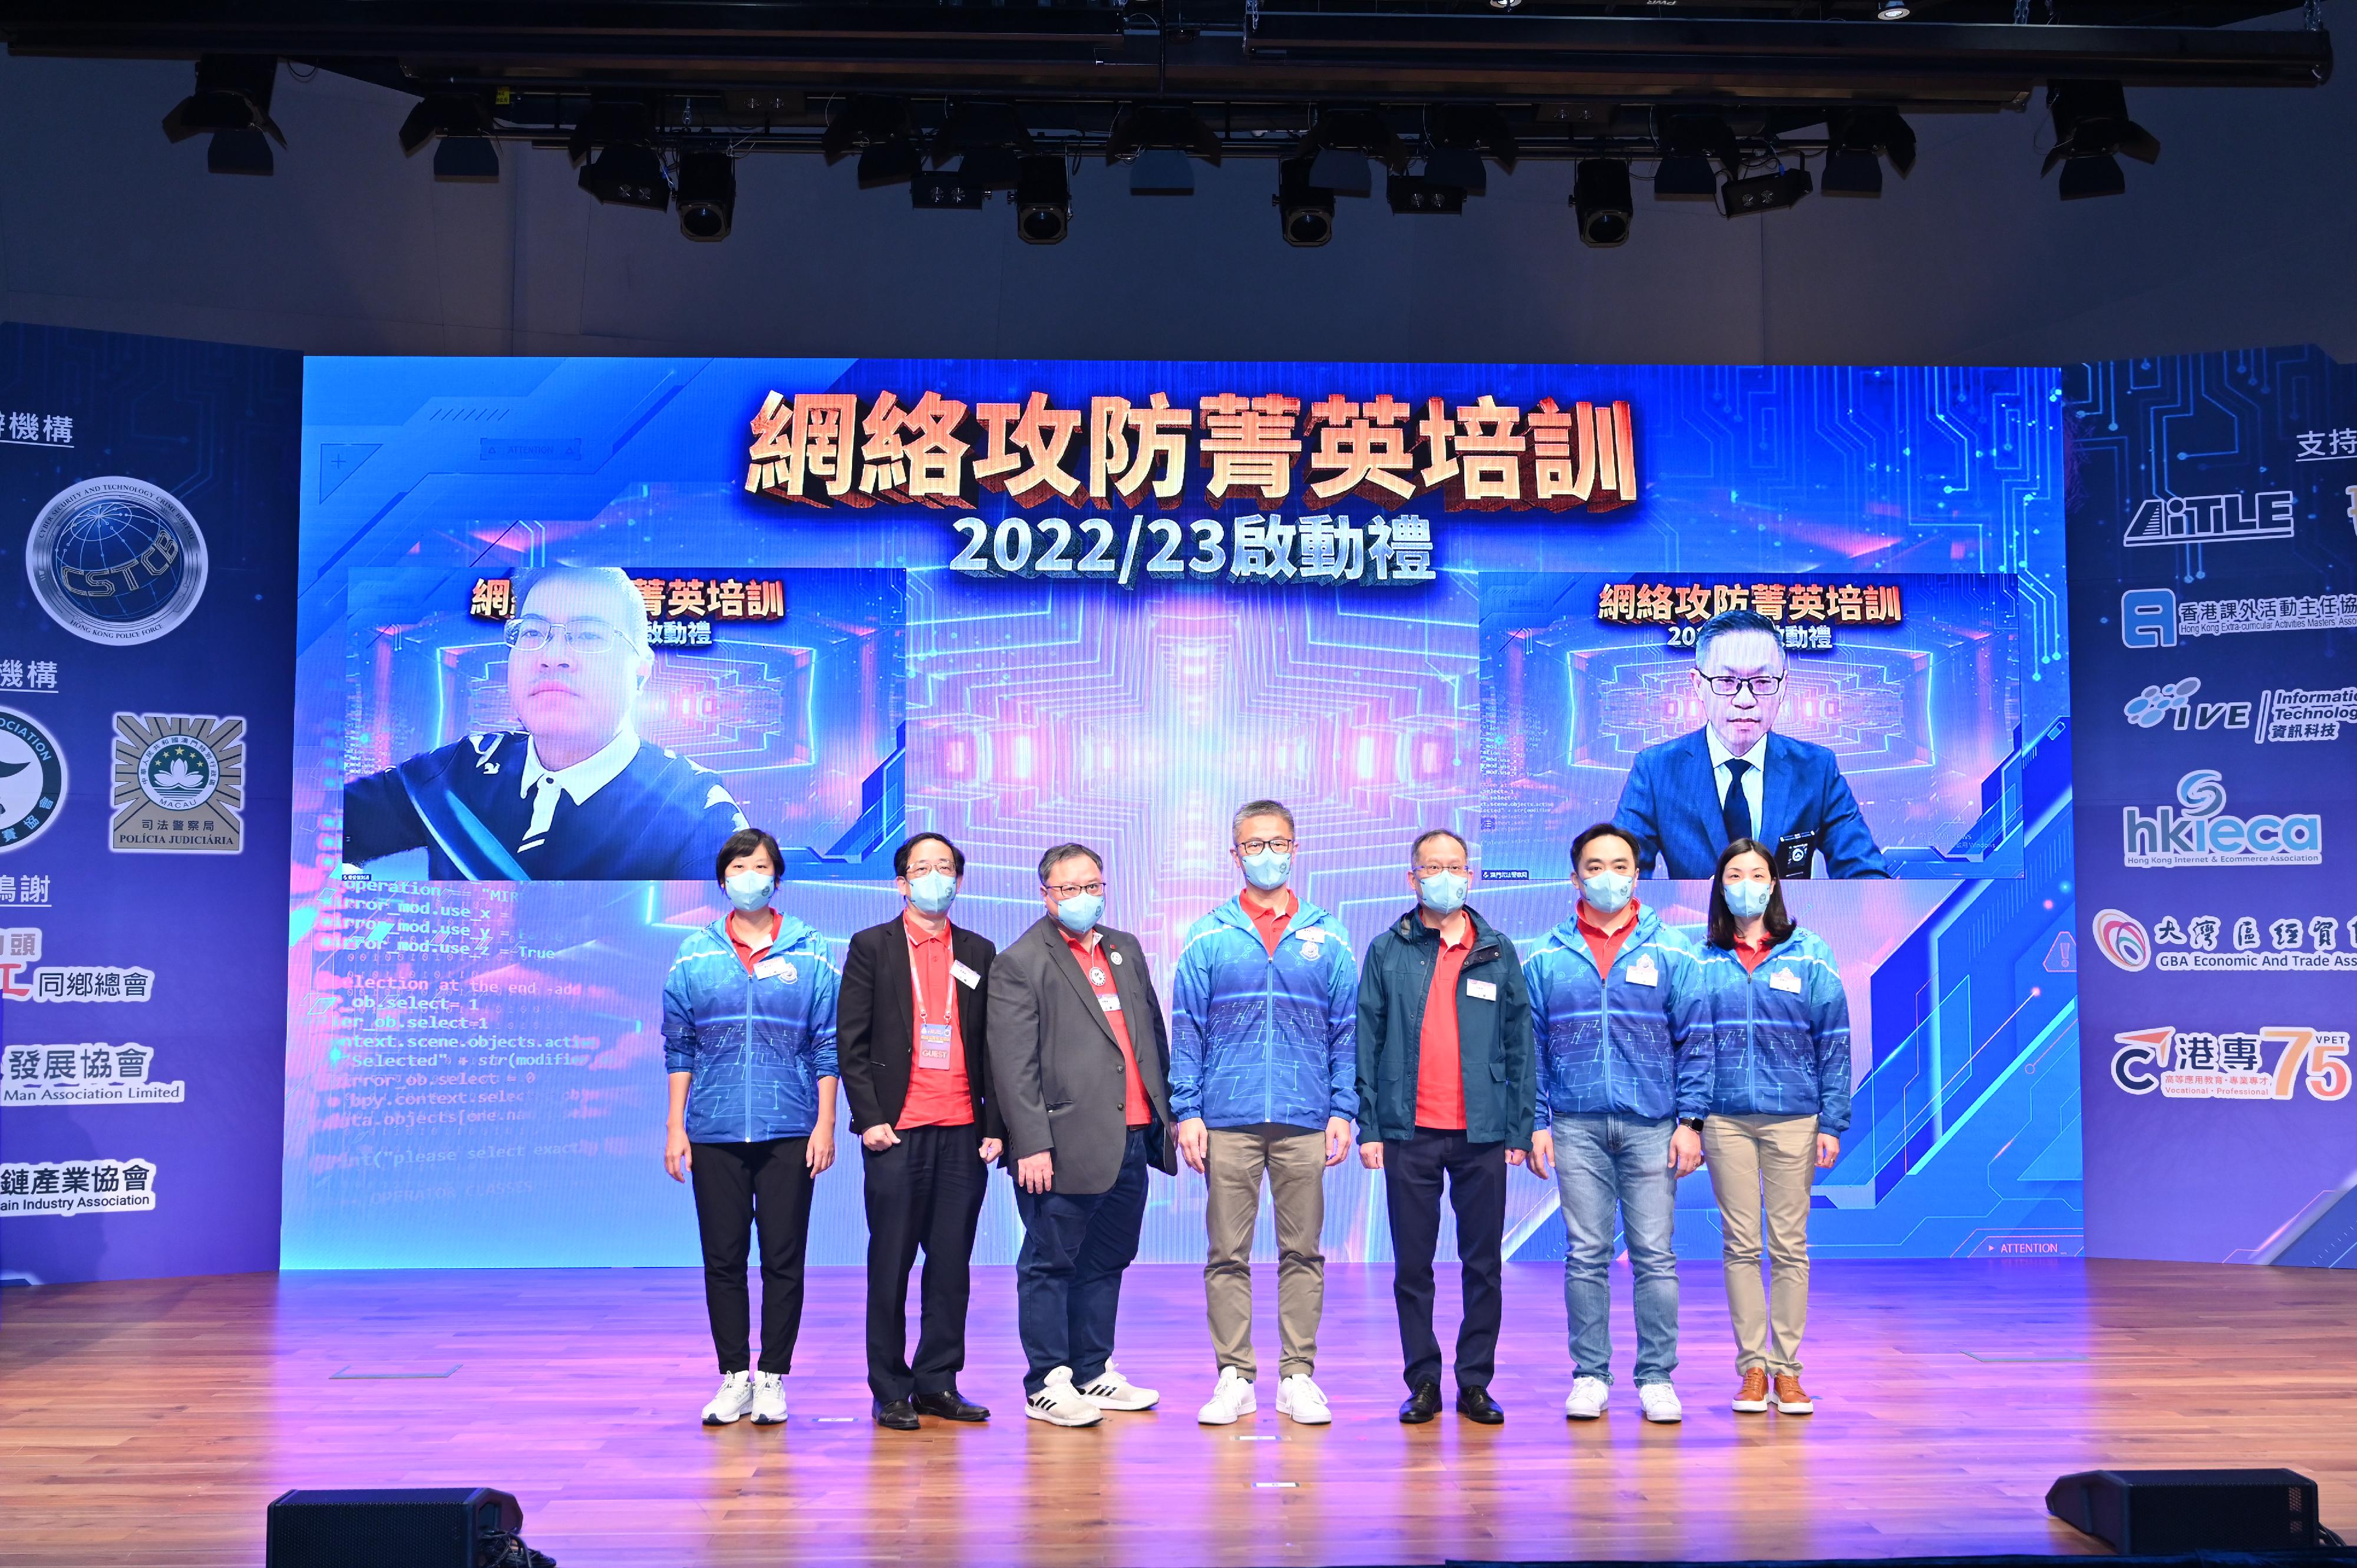 The Commissioner of Police, Mr Siu Chak-yee (centre); the President of the Hong Kong Metropolitan University, Professor Paul Lam (third right); the Chairman of Hong Kong Capture the Flag Association, Mr Frankie Leung (third left); the Chairman of Association of I.T. Leaders in Education, Mr Albert Wong (second left); the Vice President of QI-ANXIN Technology Group, Mr Liu Jin (left on screen); the Director of the Judiciary Police of the Macao Special Administrative Region Government, Mr Sit Chong-meng (right on screen); the Deputy Commissioner of Police (Operations), Mr Yuen Yuk-kin (second right); the Assistant Commissioner of Police (Crime), Ms Chung Wing-man (first left); and the Chief Superintendent (Cyber Security and Technology Crime Bureau), Ms Cheng Lai-ki (first right), officiate at the Cyber Attack and Defence Elite Training 2022/23 - Youth Series kick-off ceremony today (December 10).